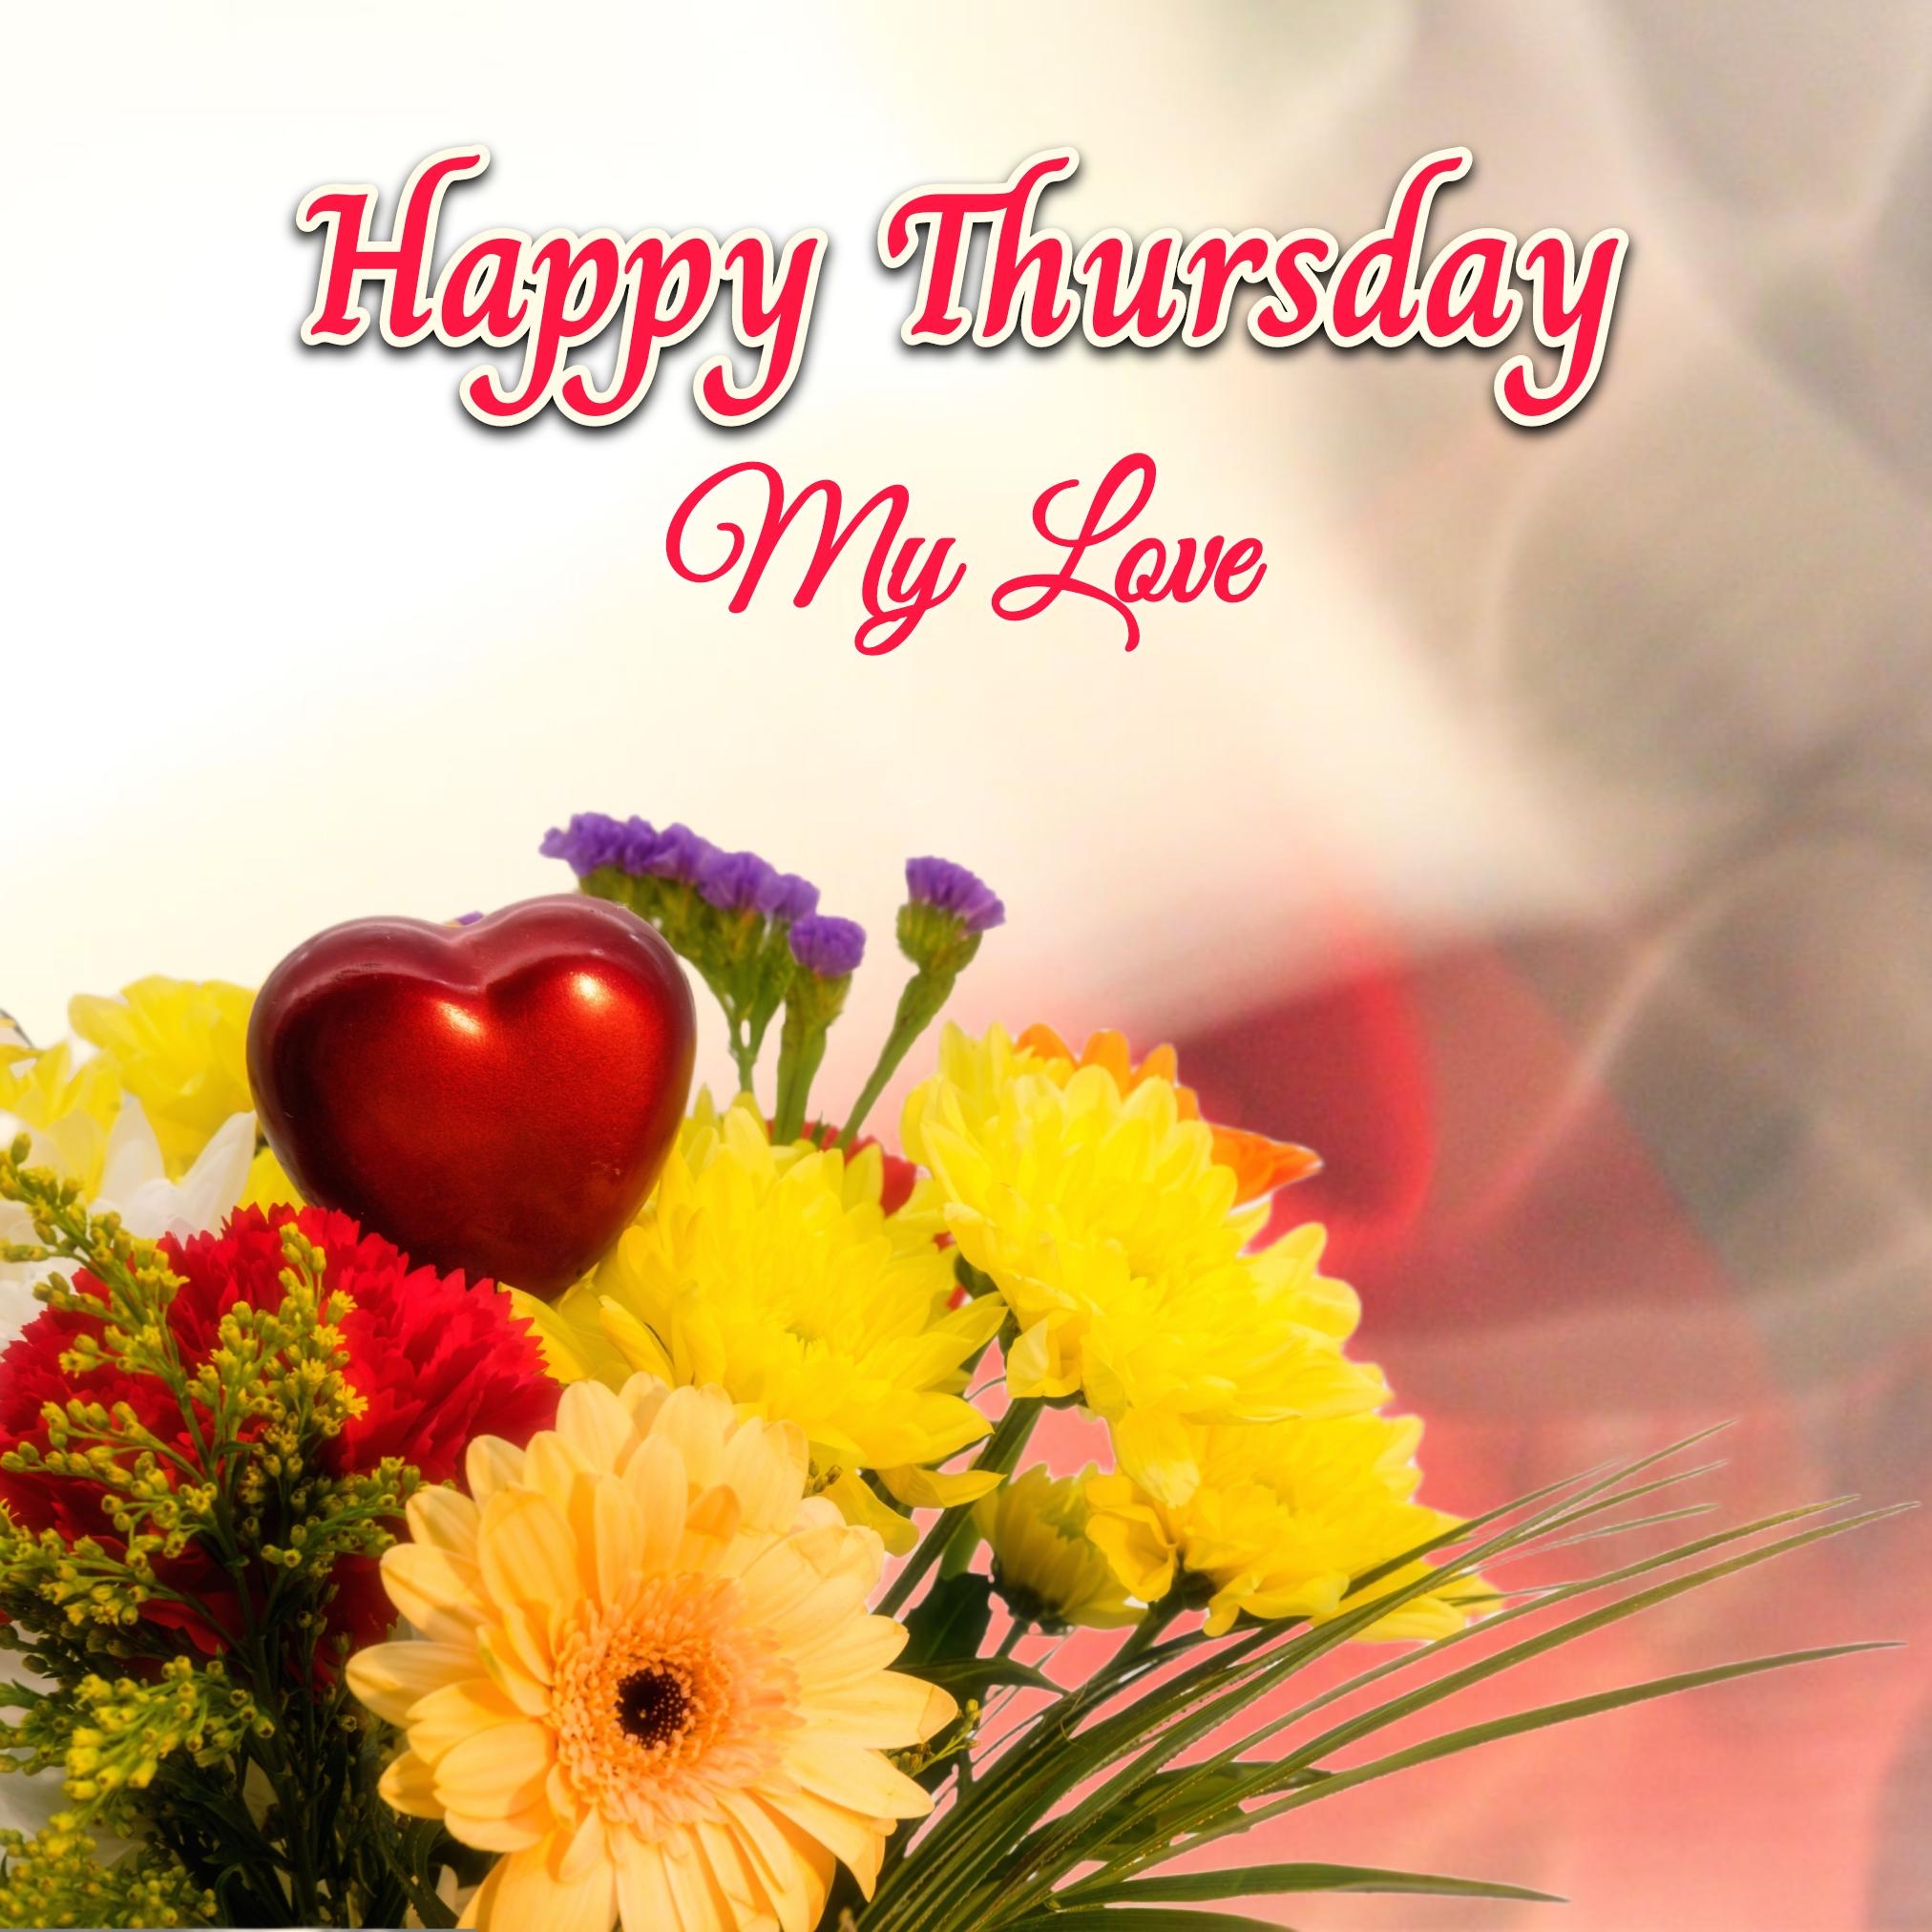 Happy Thursday My Love Images for Wife